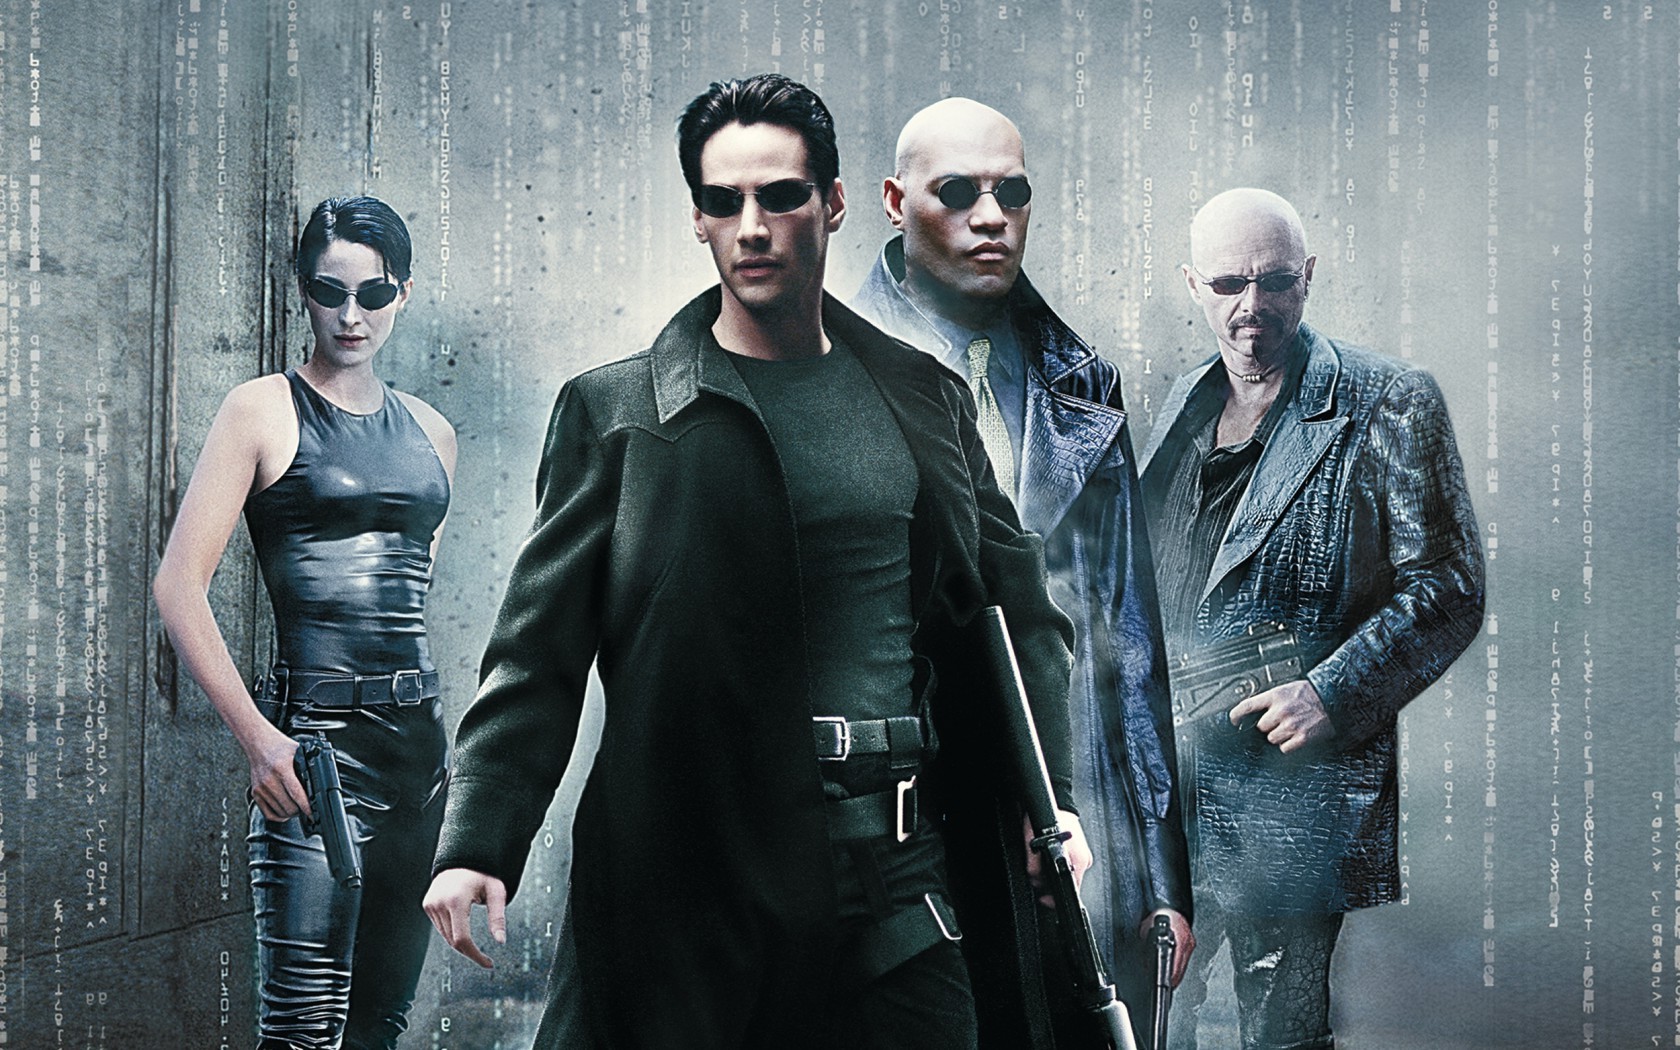 The Matrix, Movies, Neo, Keanu Reeves, Morpheus, Carrie Anne Moss, Trinity, Laurence Fishburne Wallpaper